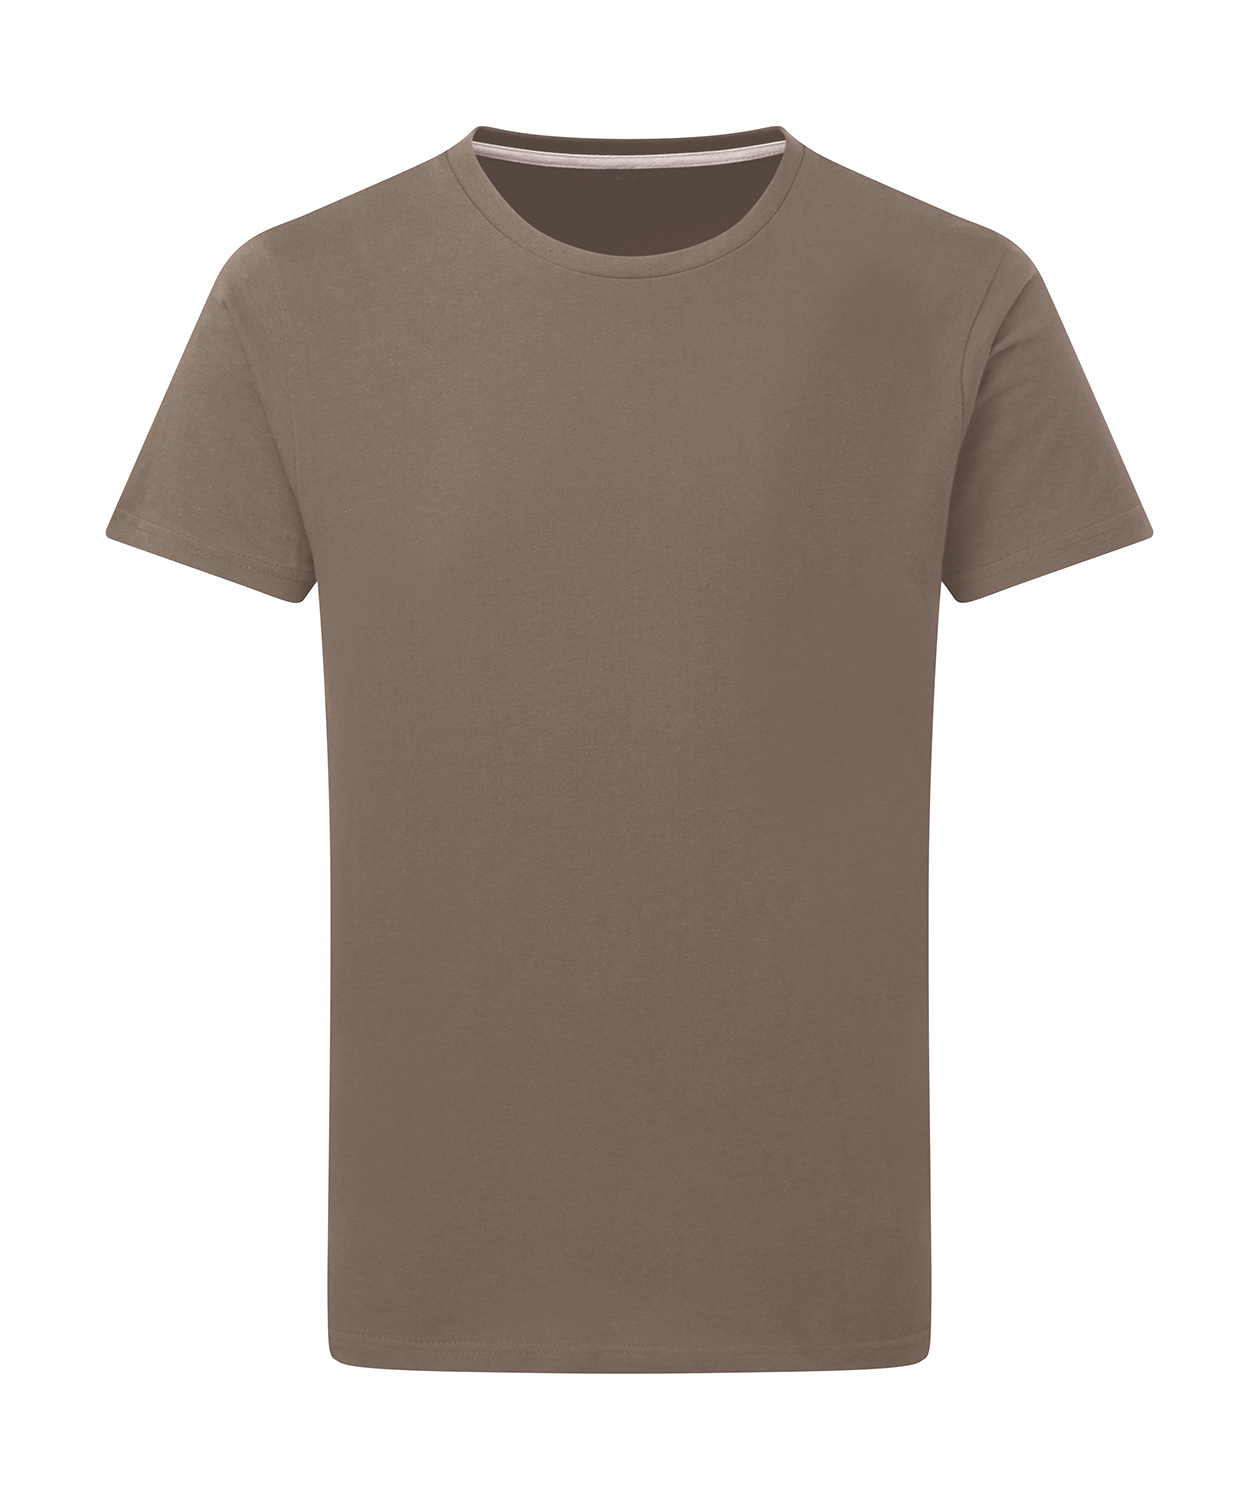 The south face Deep Taupe